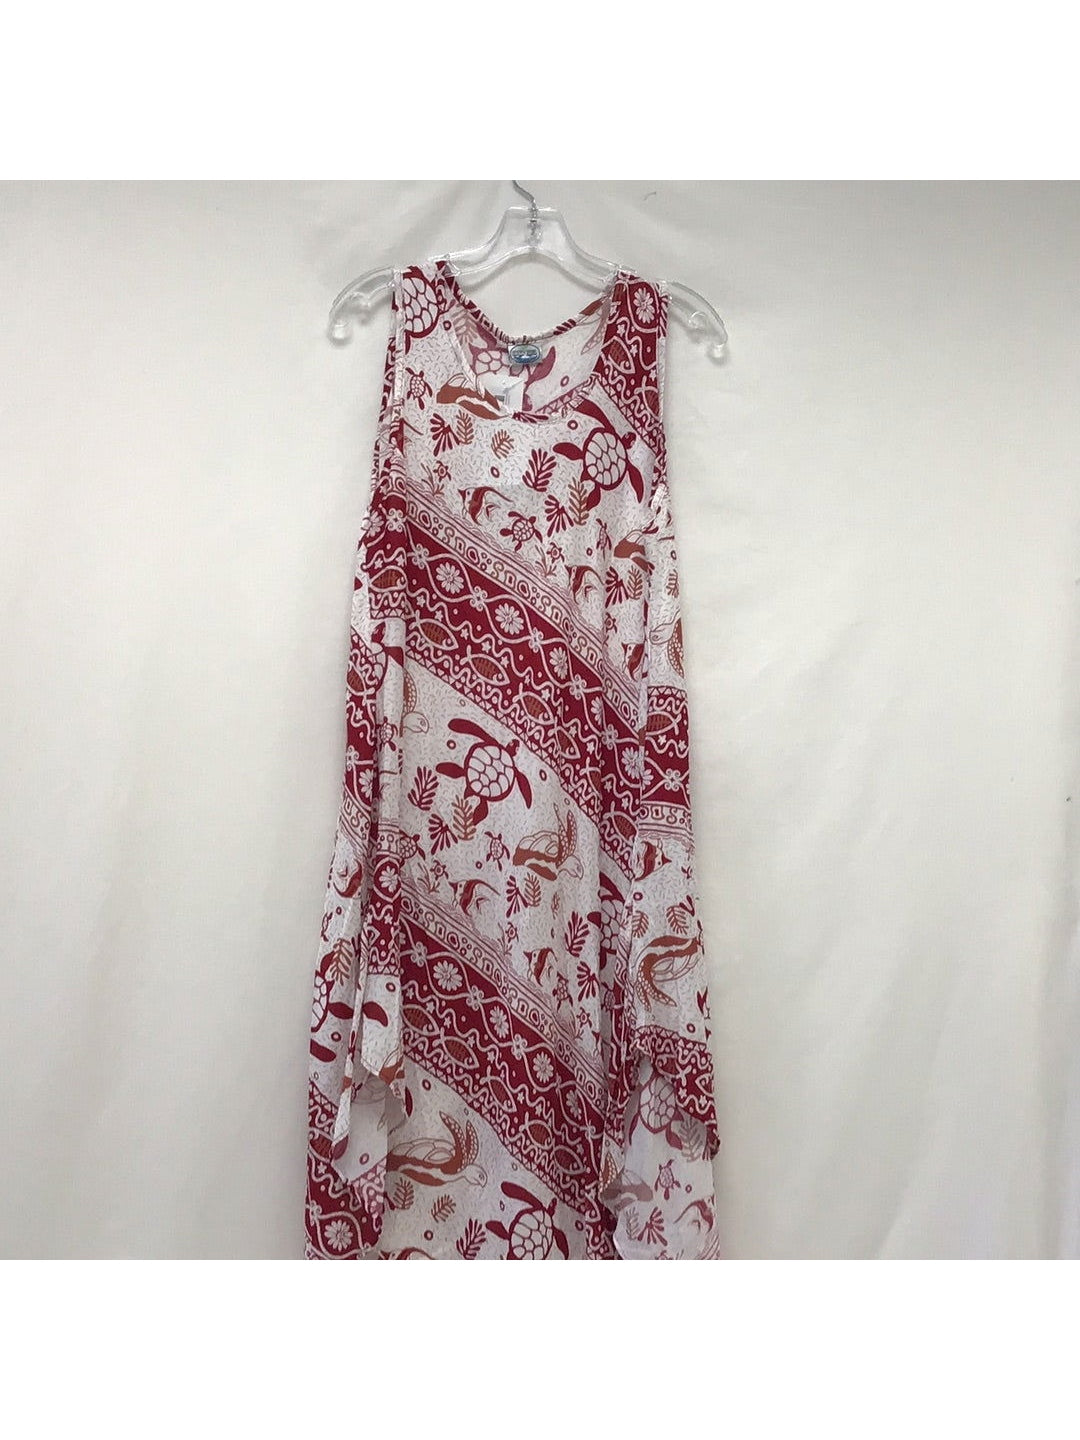 Ocean Blue Apparel Women's Red Floral Sleeveless Dress F - The Kennedy Collective Thrift - 